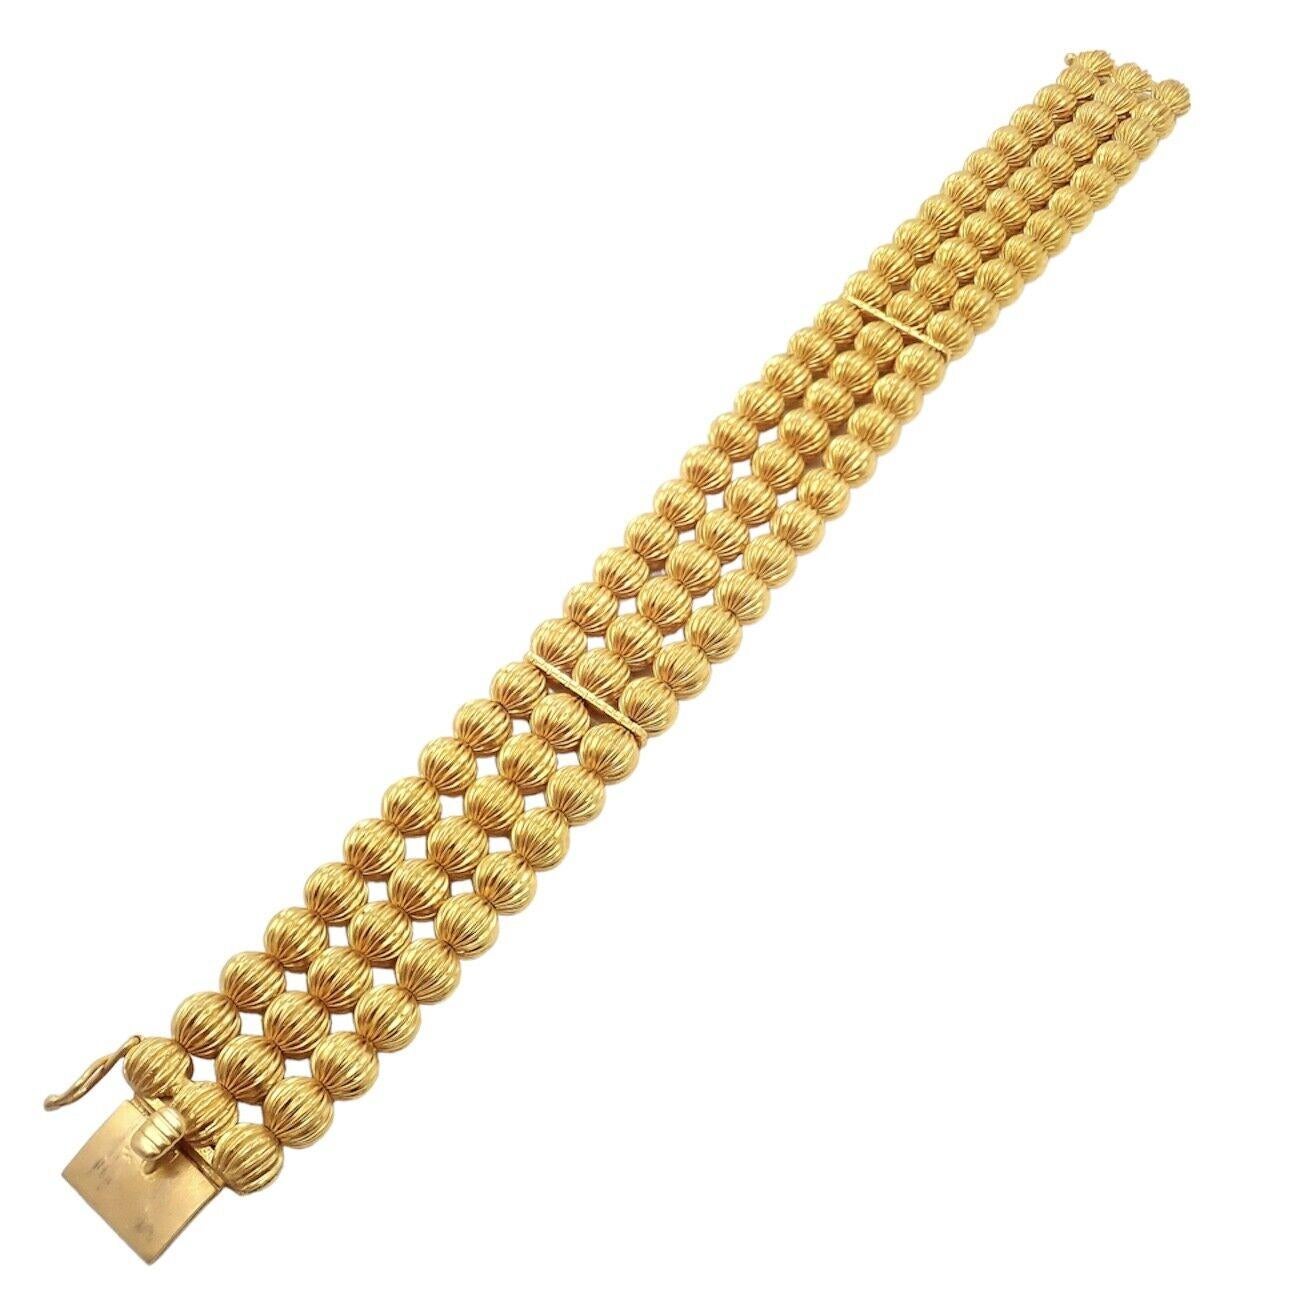 18k Yellow Gold Carved Bead Ball Bracelet by Ilias Lalaounis Greece.
Details: 
Length 8